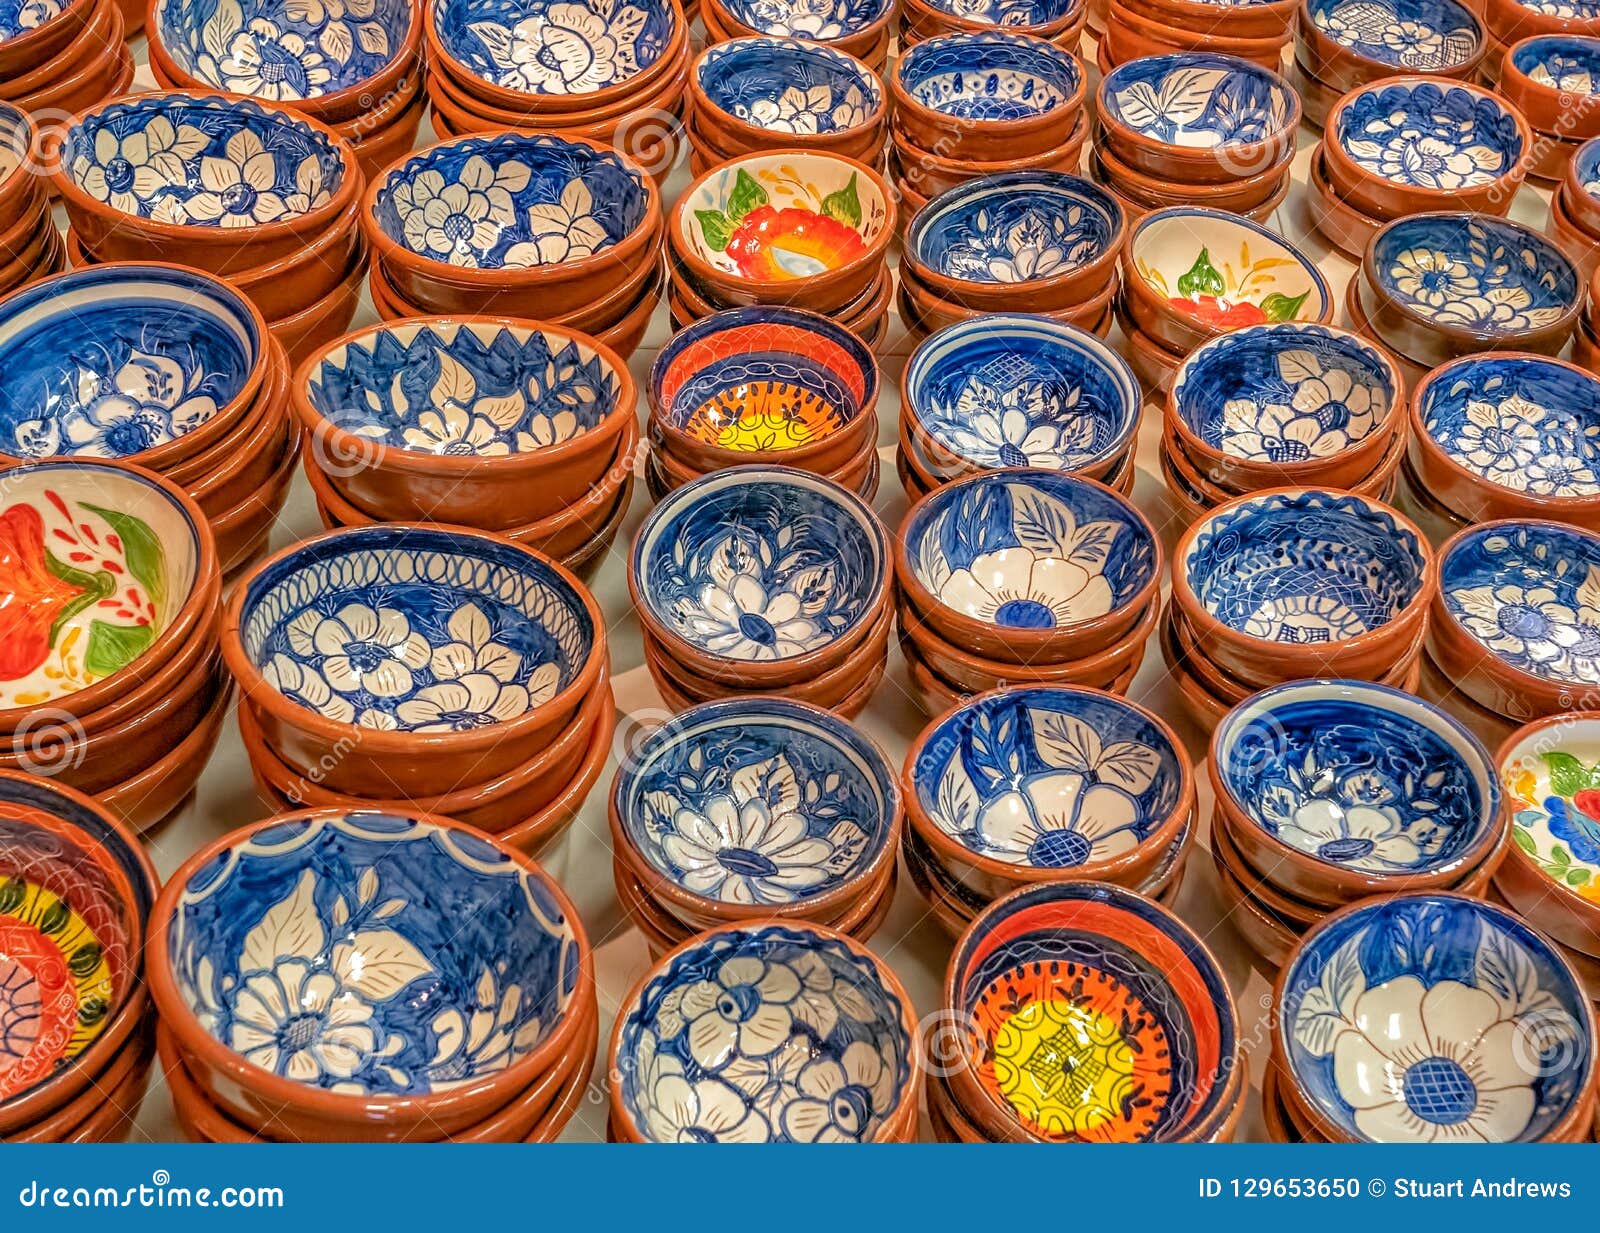 traditionally decorated portuguese terracotta dishes, portugal..